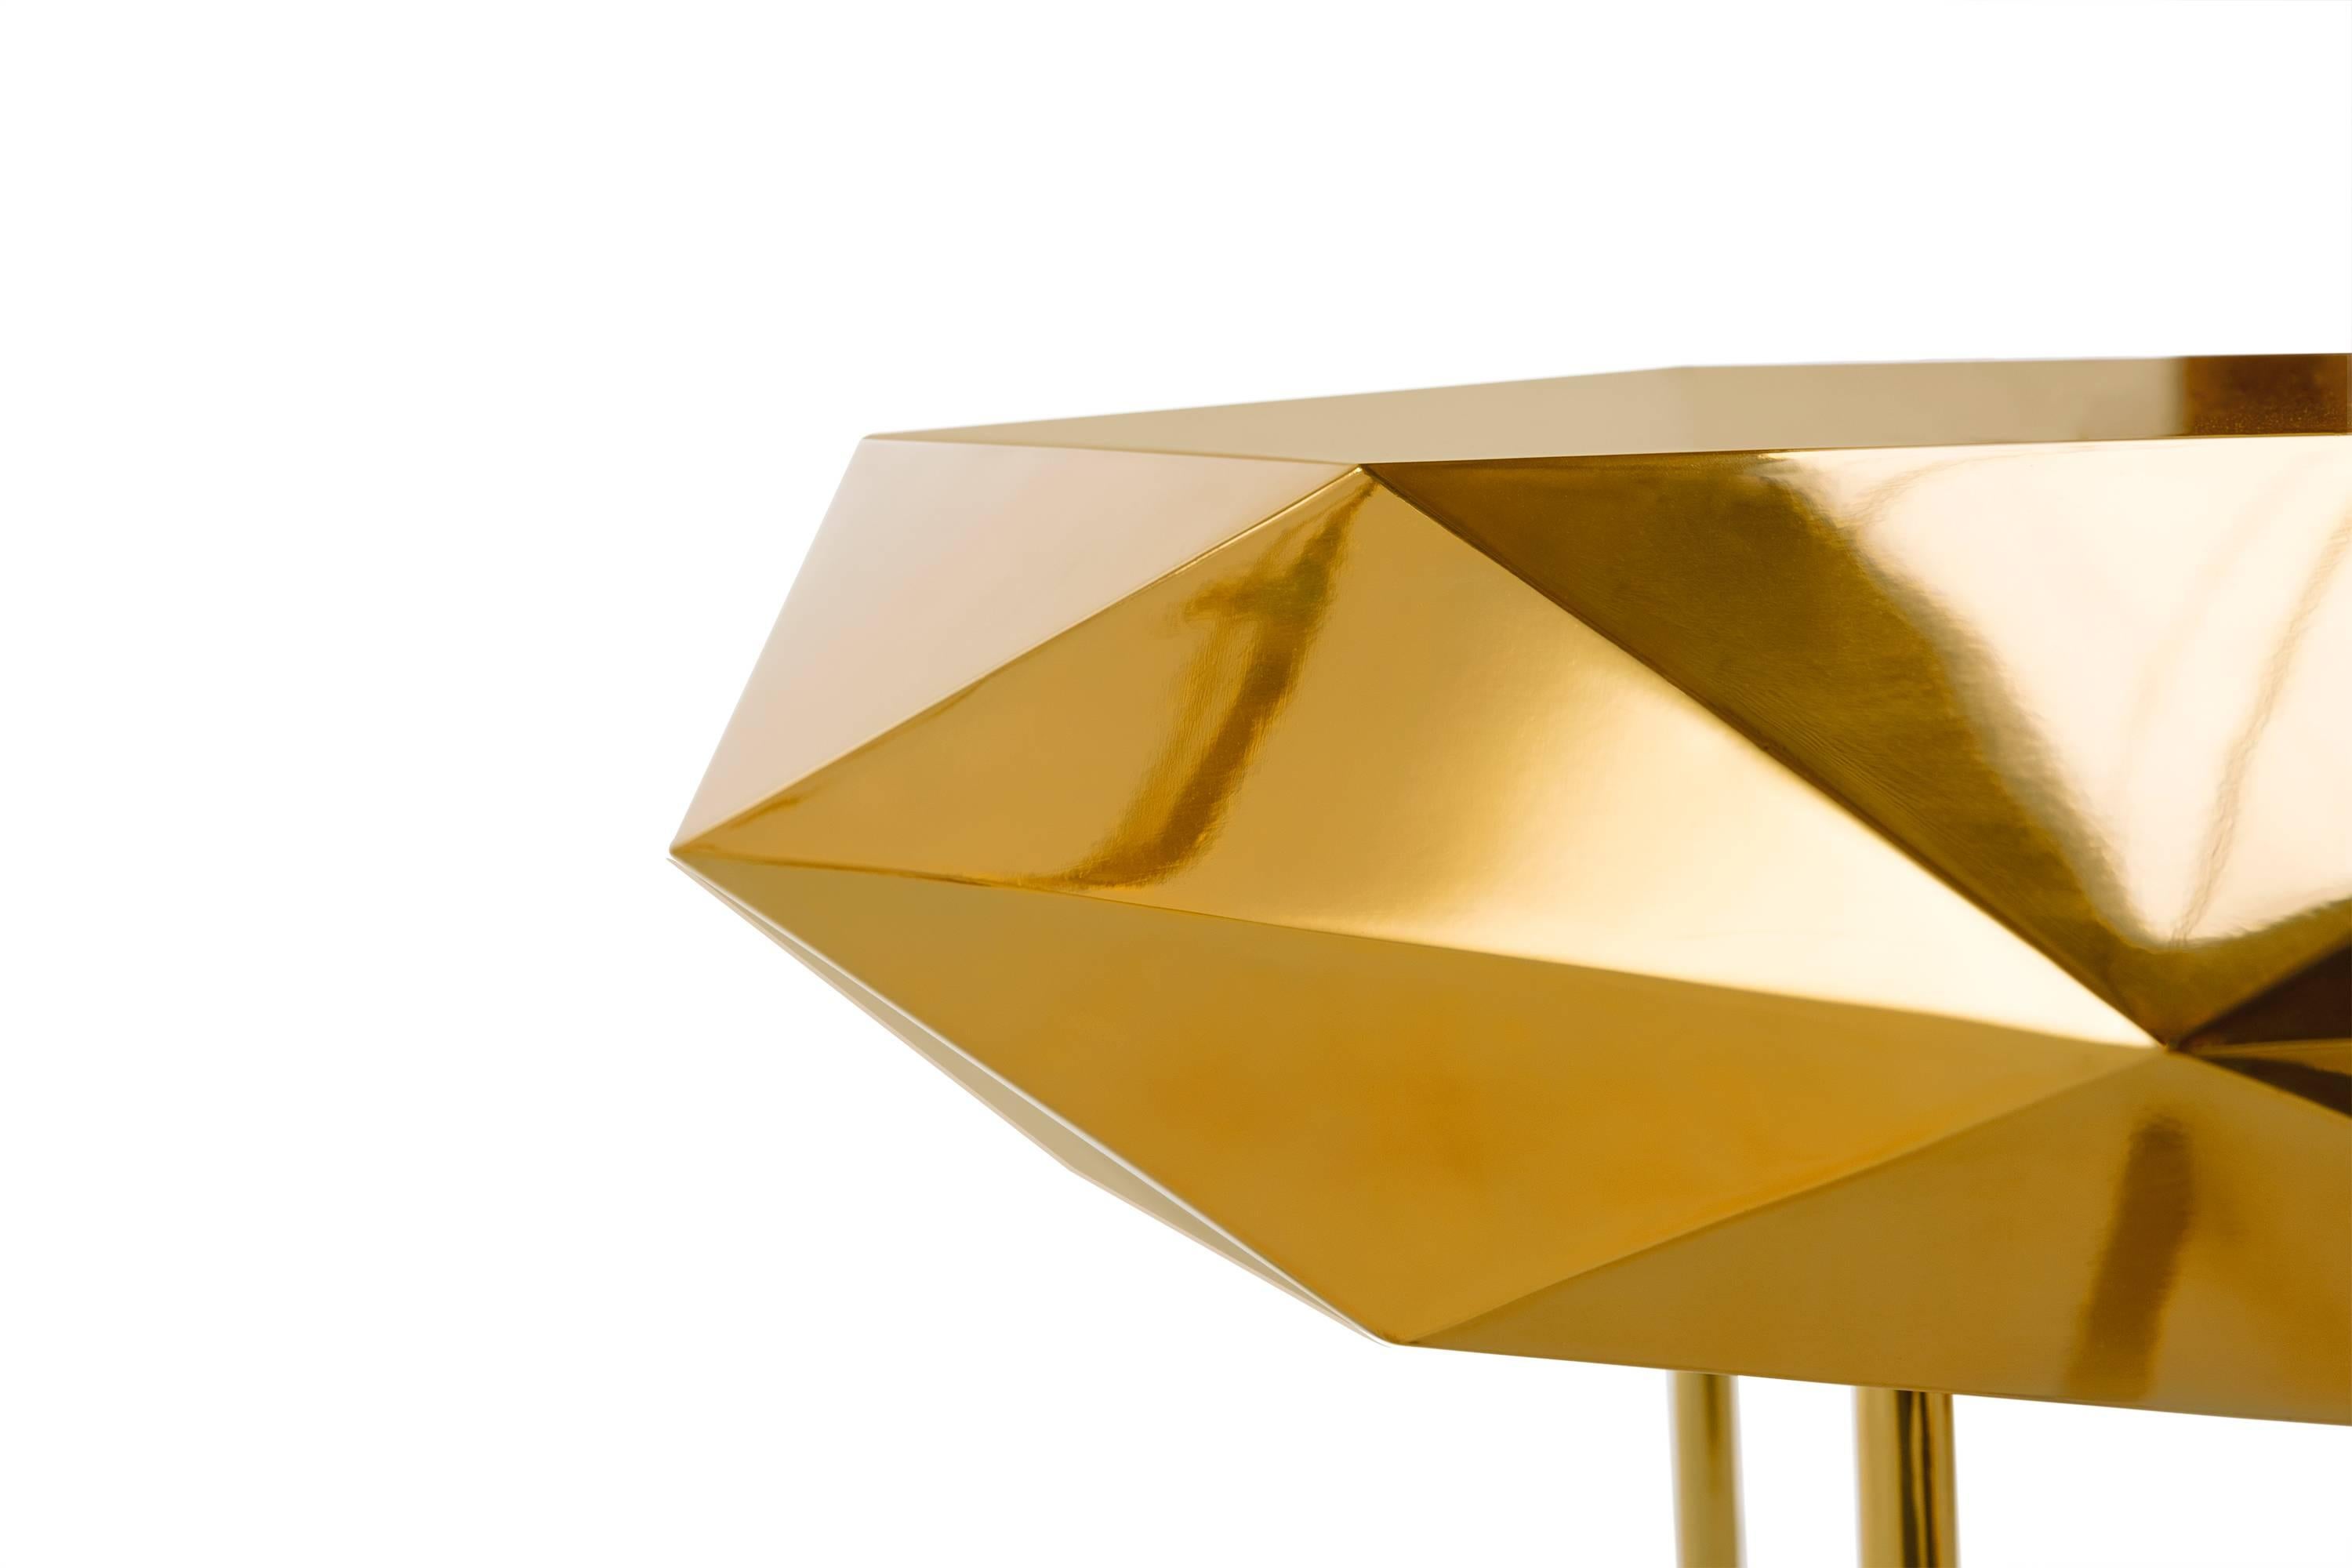 Stella coffee table gold small is gold, circular with a starry edge, delightful in any interior space. The table is from the 88 secrets collection designed by Nika Zupanc for scarlet splendour.

Material: Metal with gloss finish.